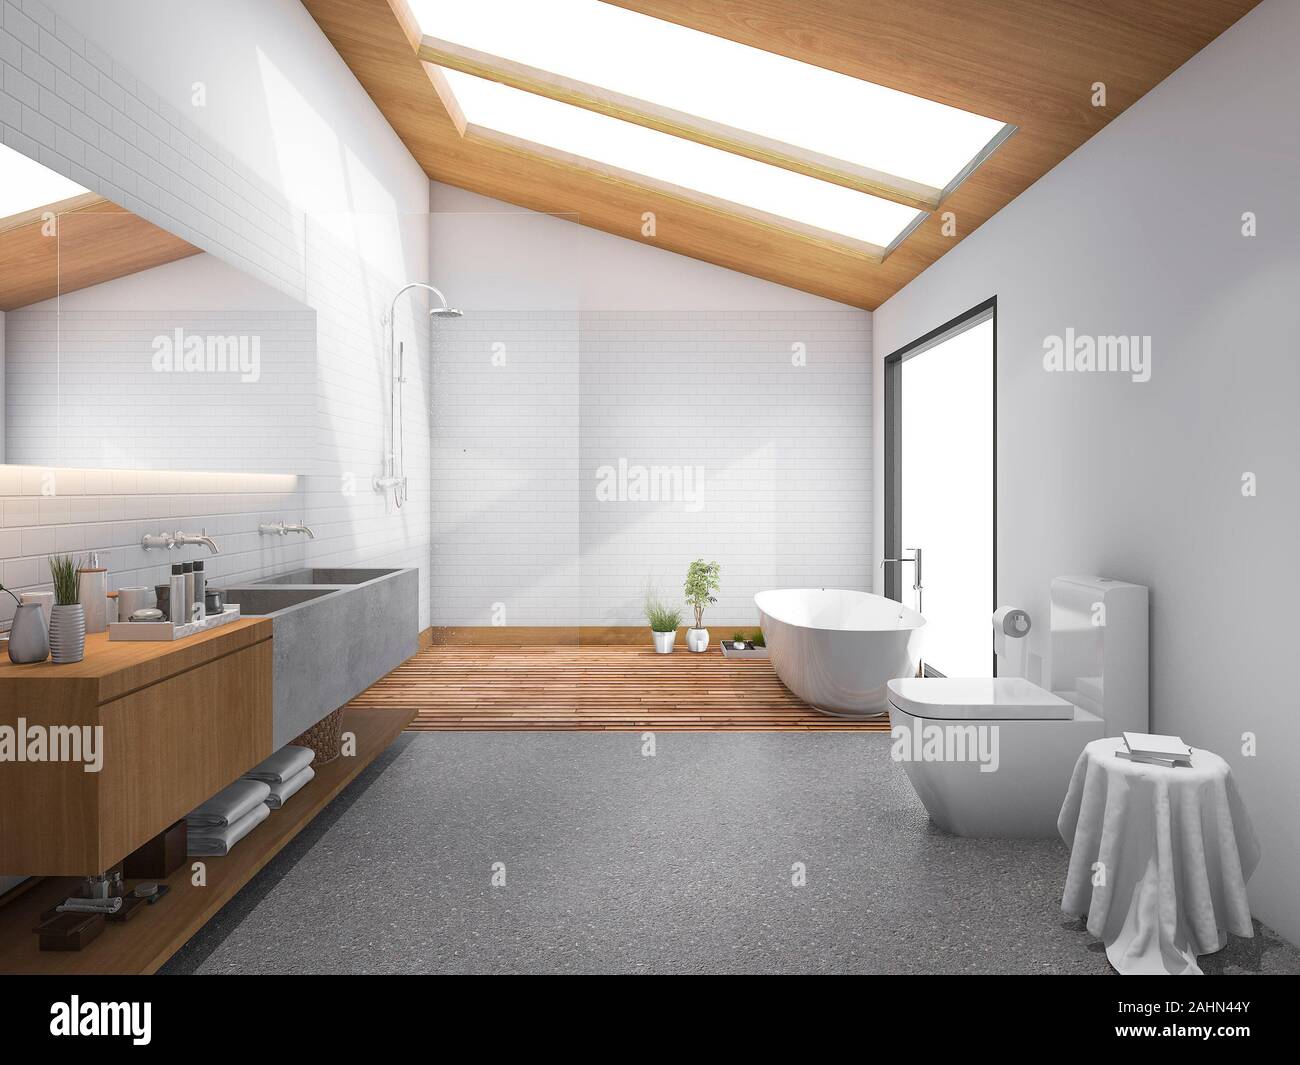 3d rendering skylight wood roof with modern design bathroom and toilet  Stock Photo - Alamy